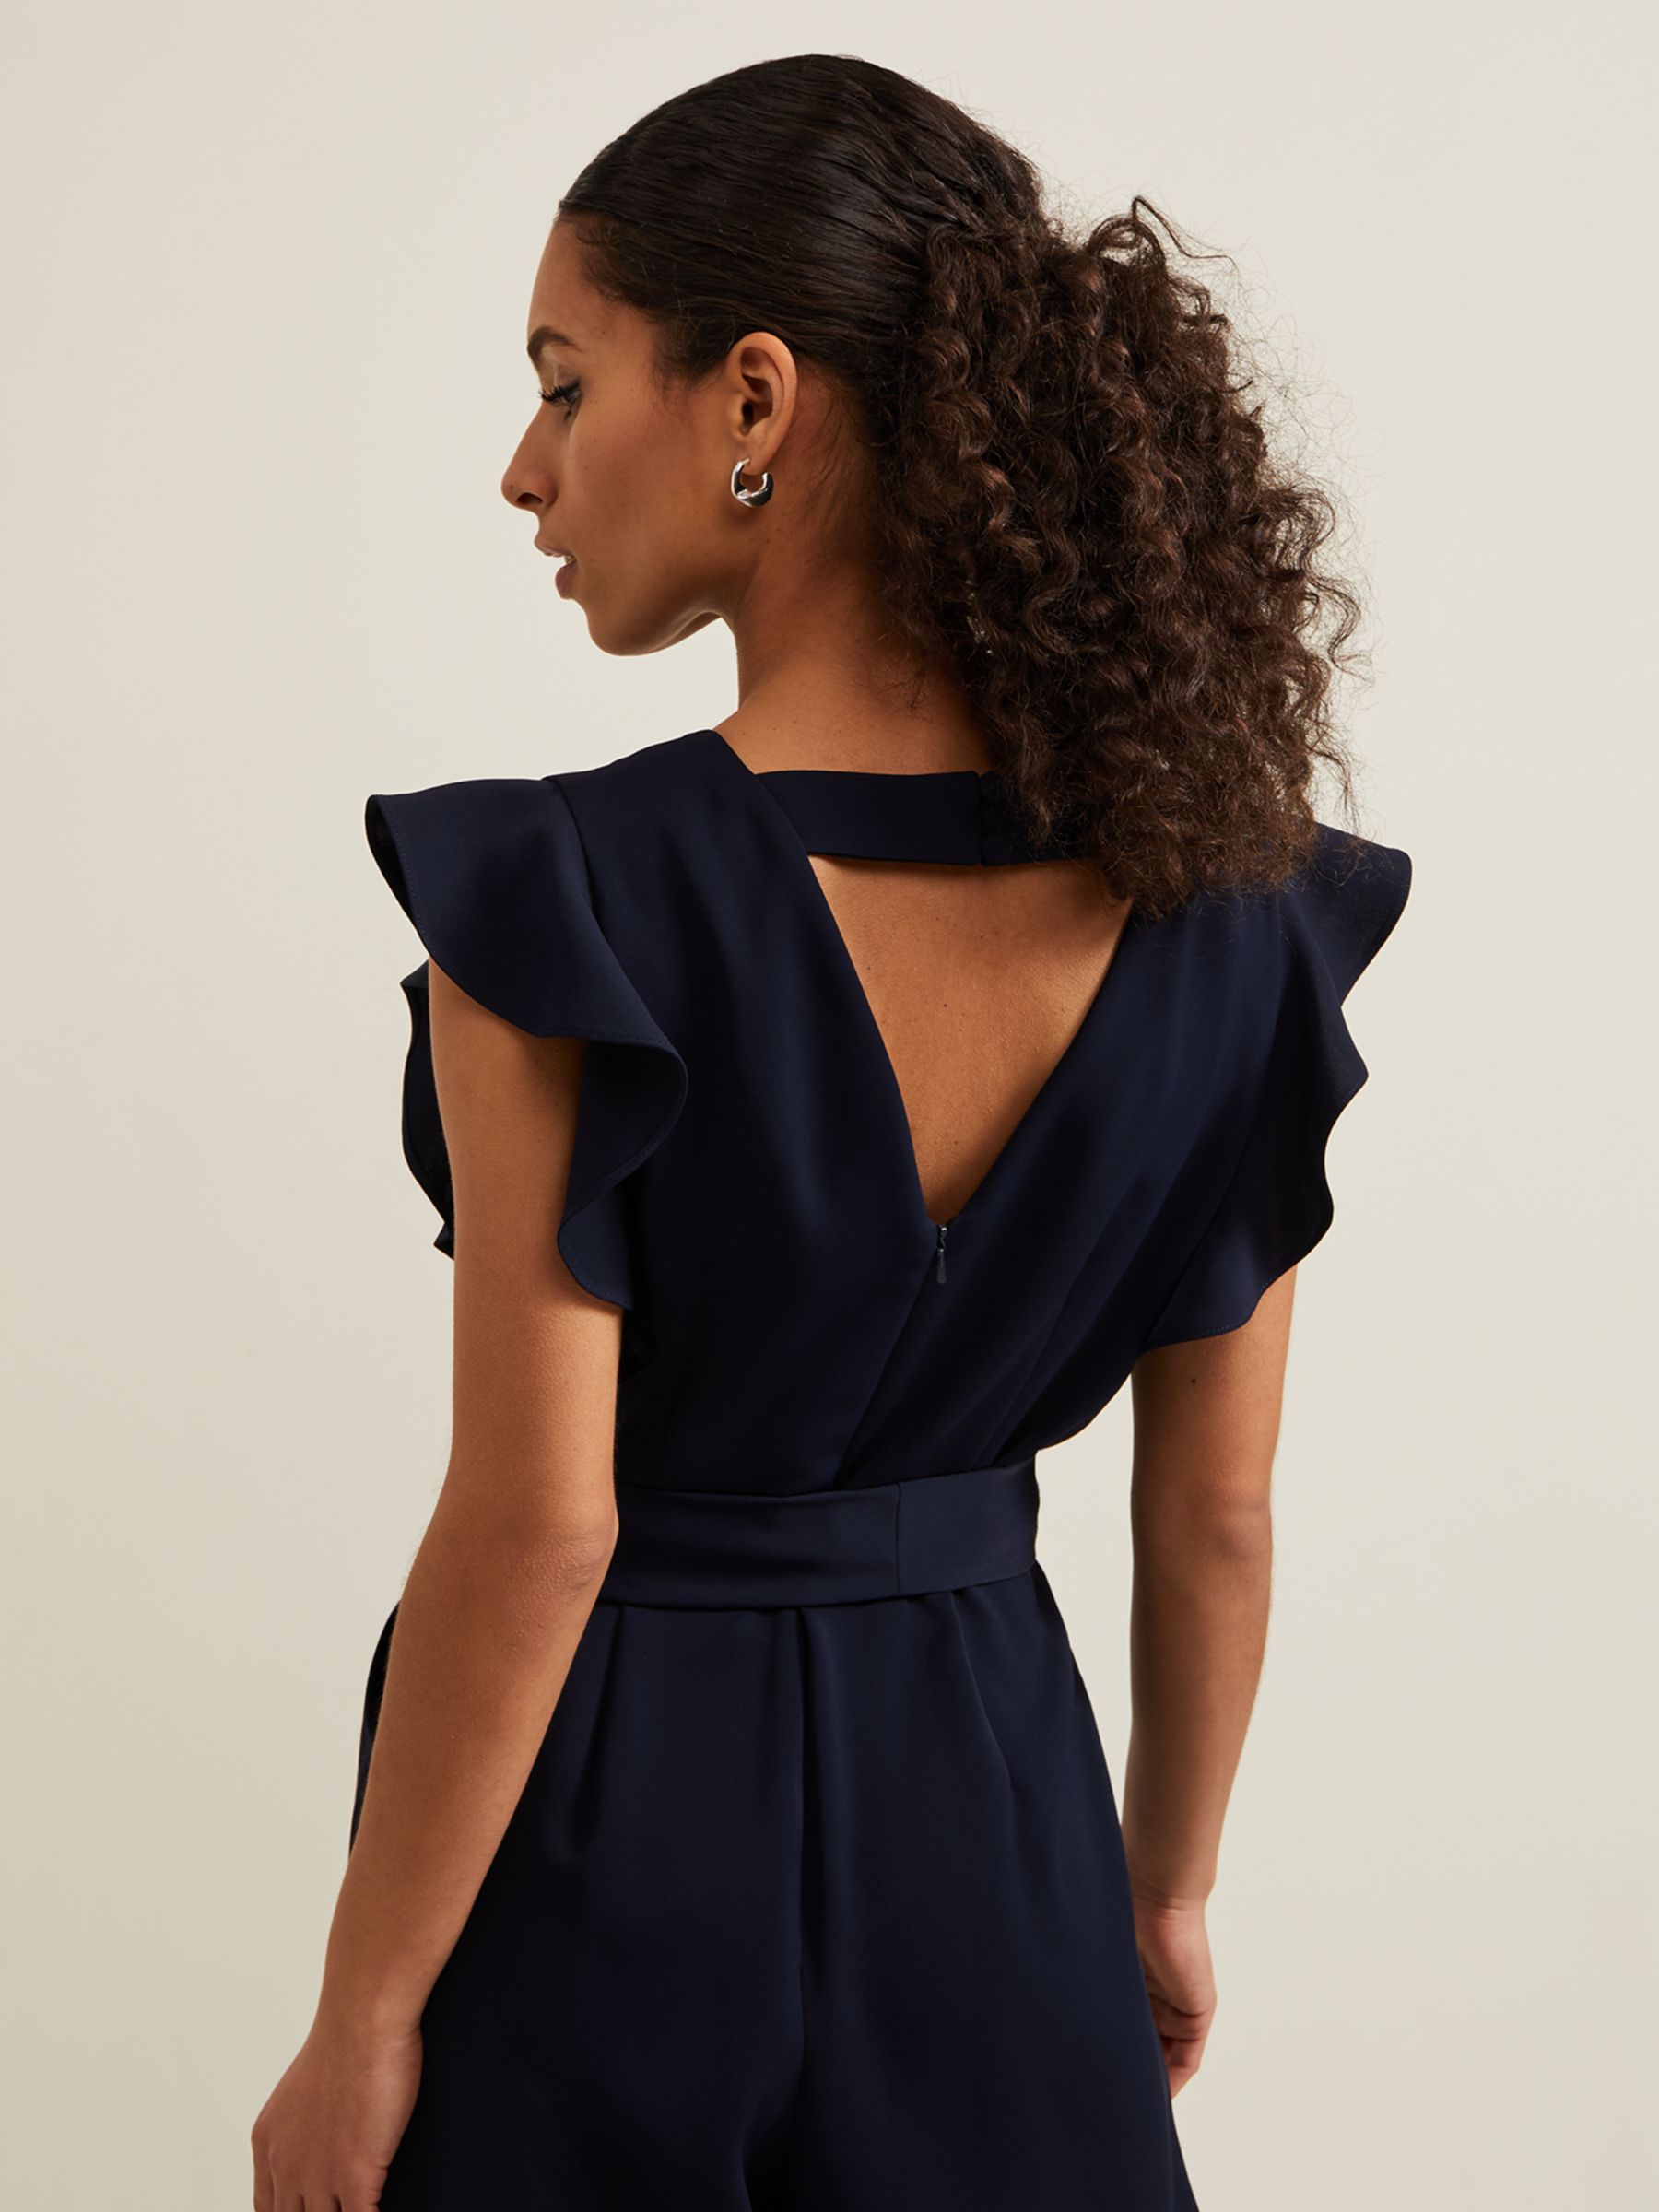 Buy Phase Eight Petite Kallie Frill Sleeve Jumpsuit, Navy Online at johnlewis.com